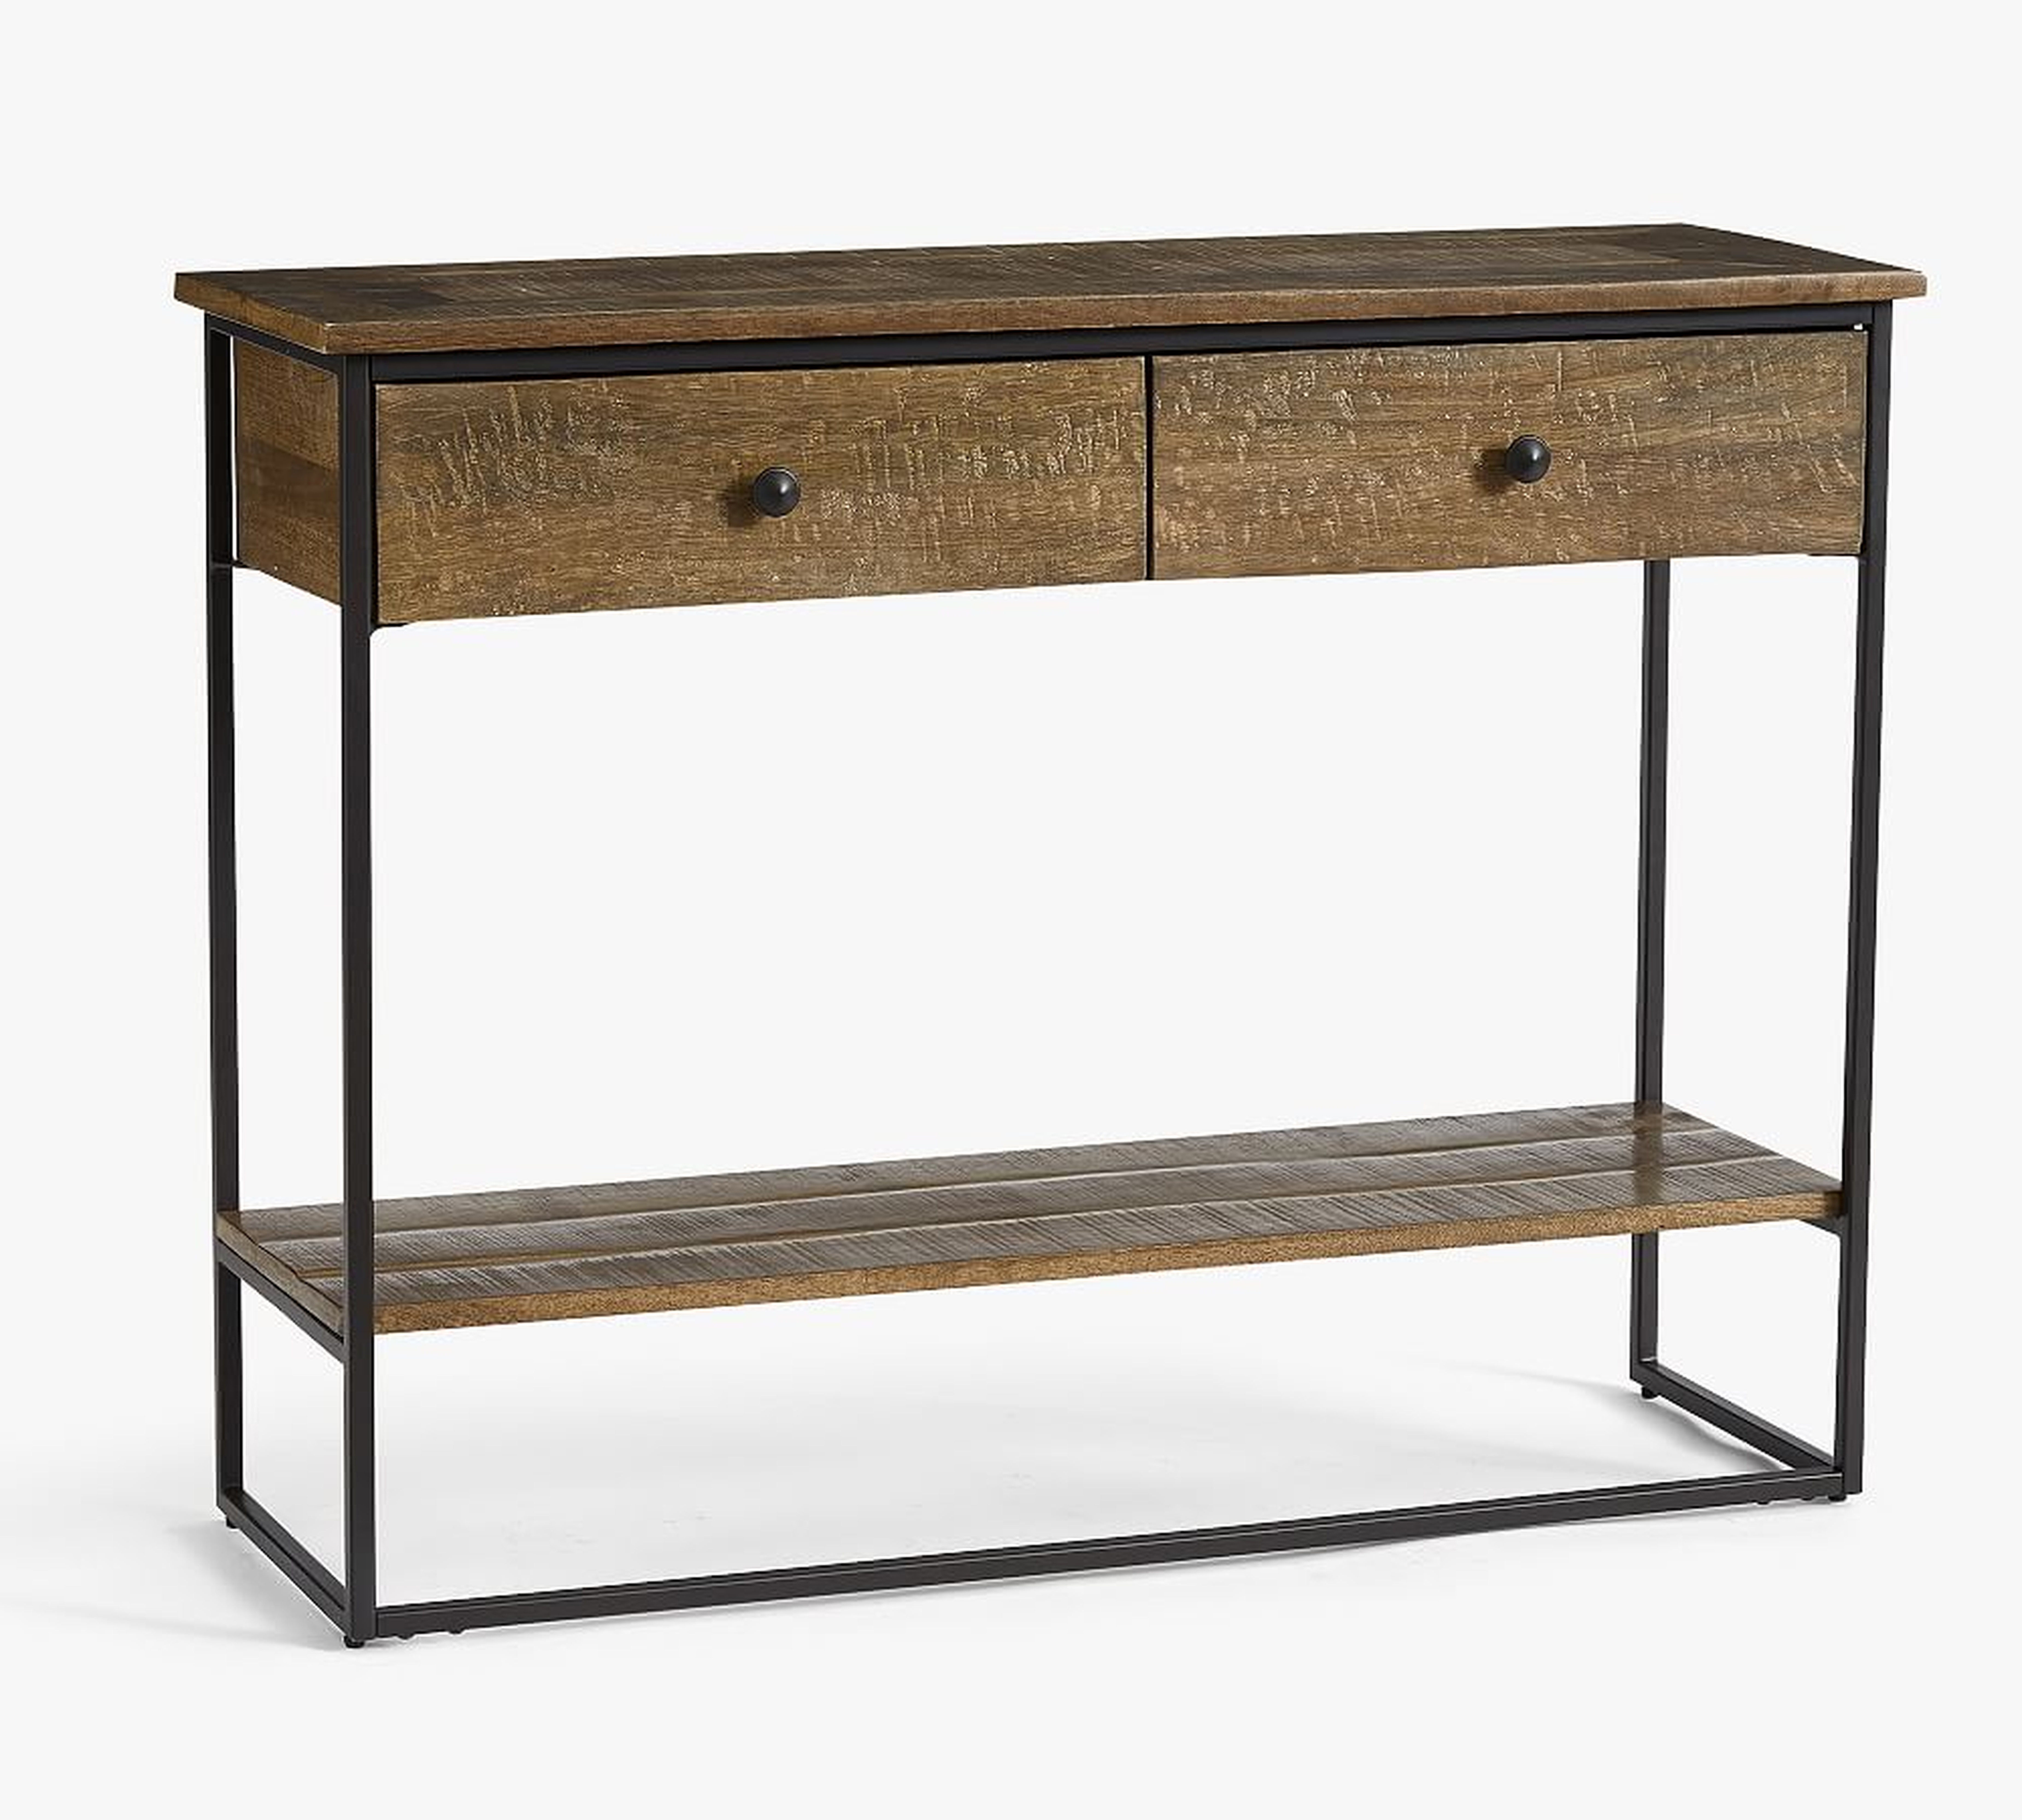 Sanford 39.5" Console Table, Cobble Brown - Pottery Barn